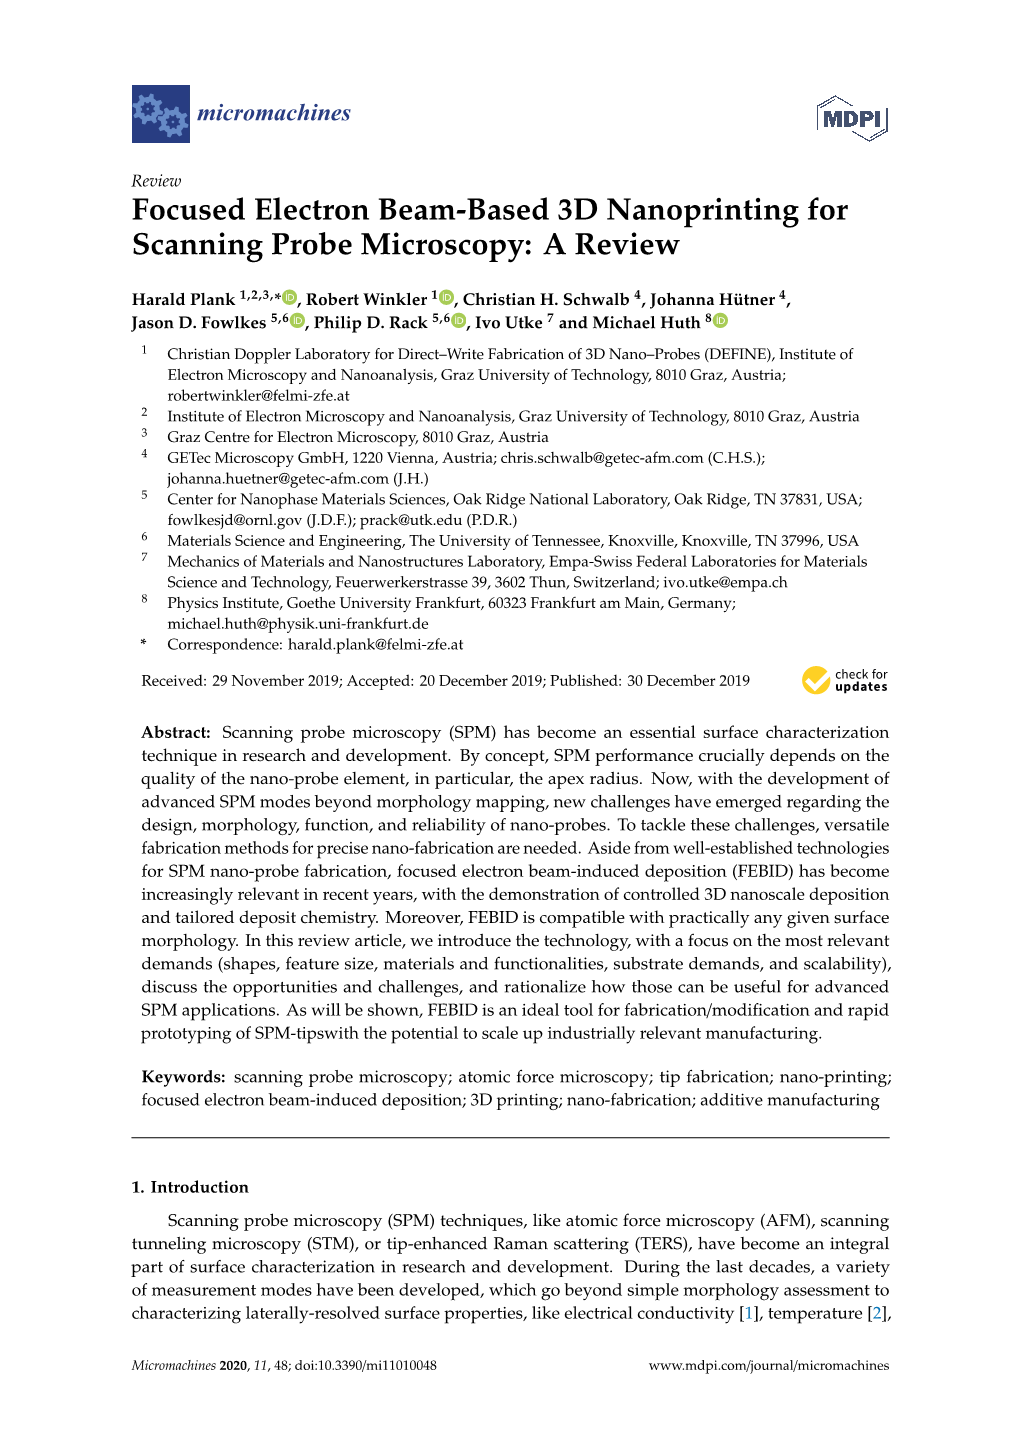 Focused Electron Beam-Based 3D Nanoprinting for Scanning Probe Microscopy: a Review